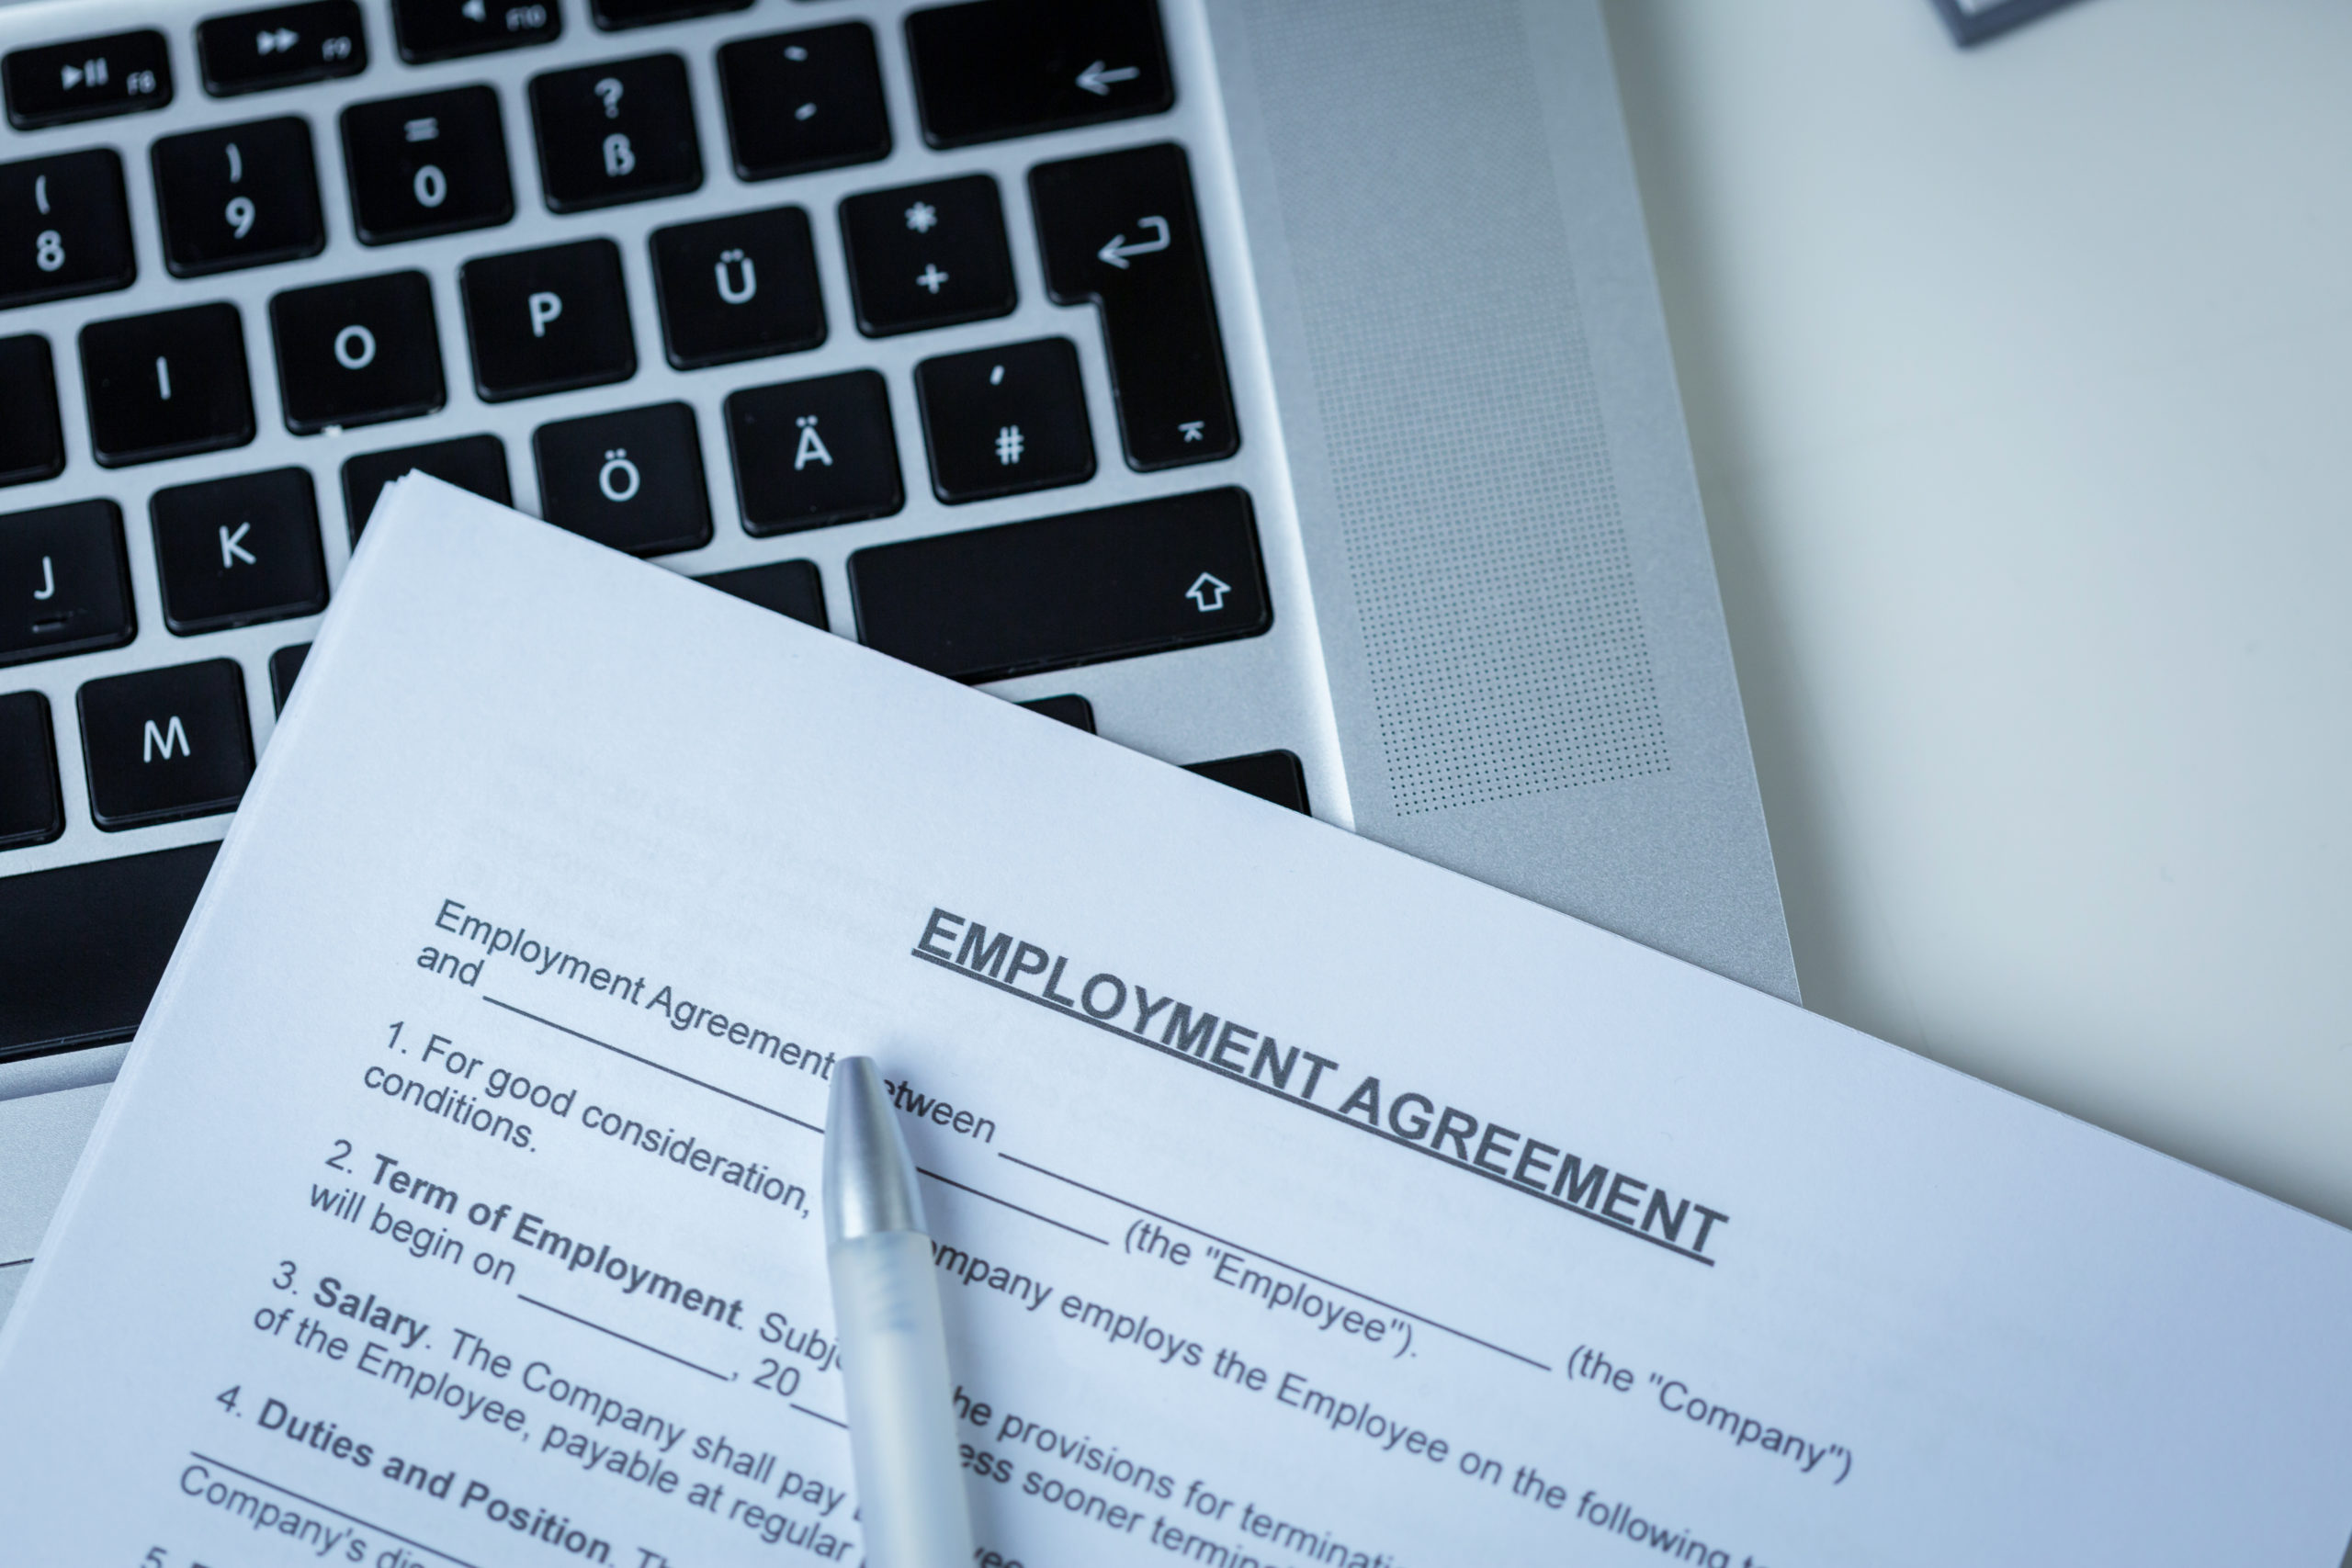 Go-to Strategies to Help You Understand the Associate Employment Agreement